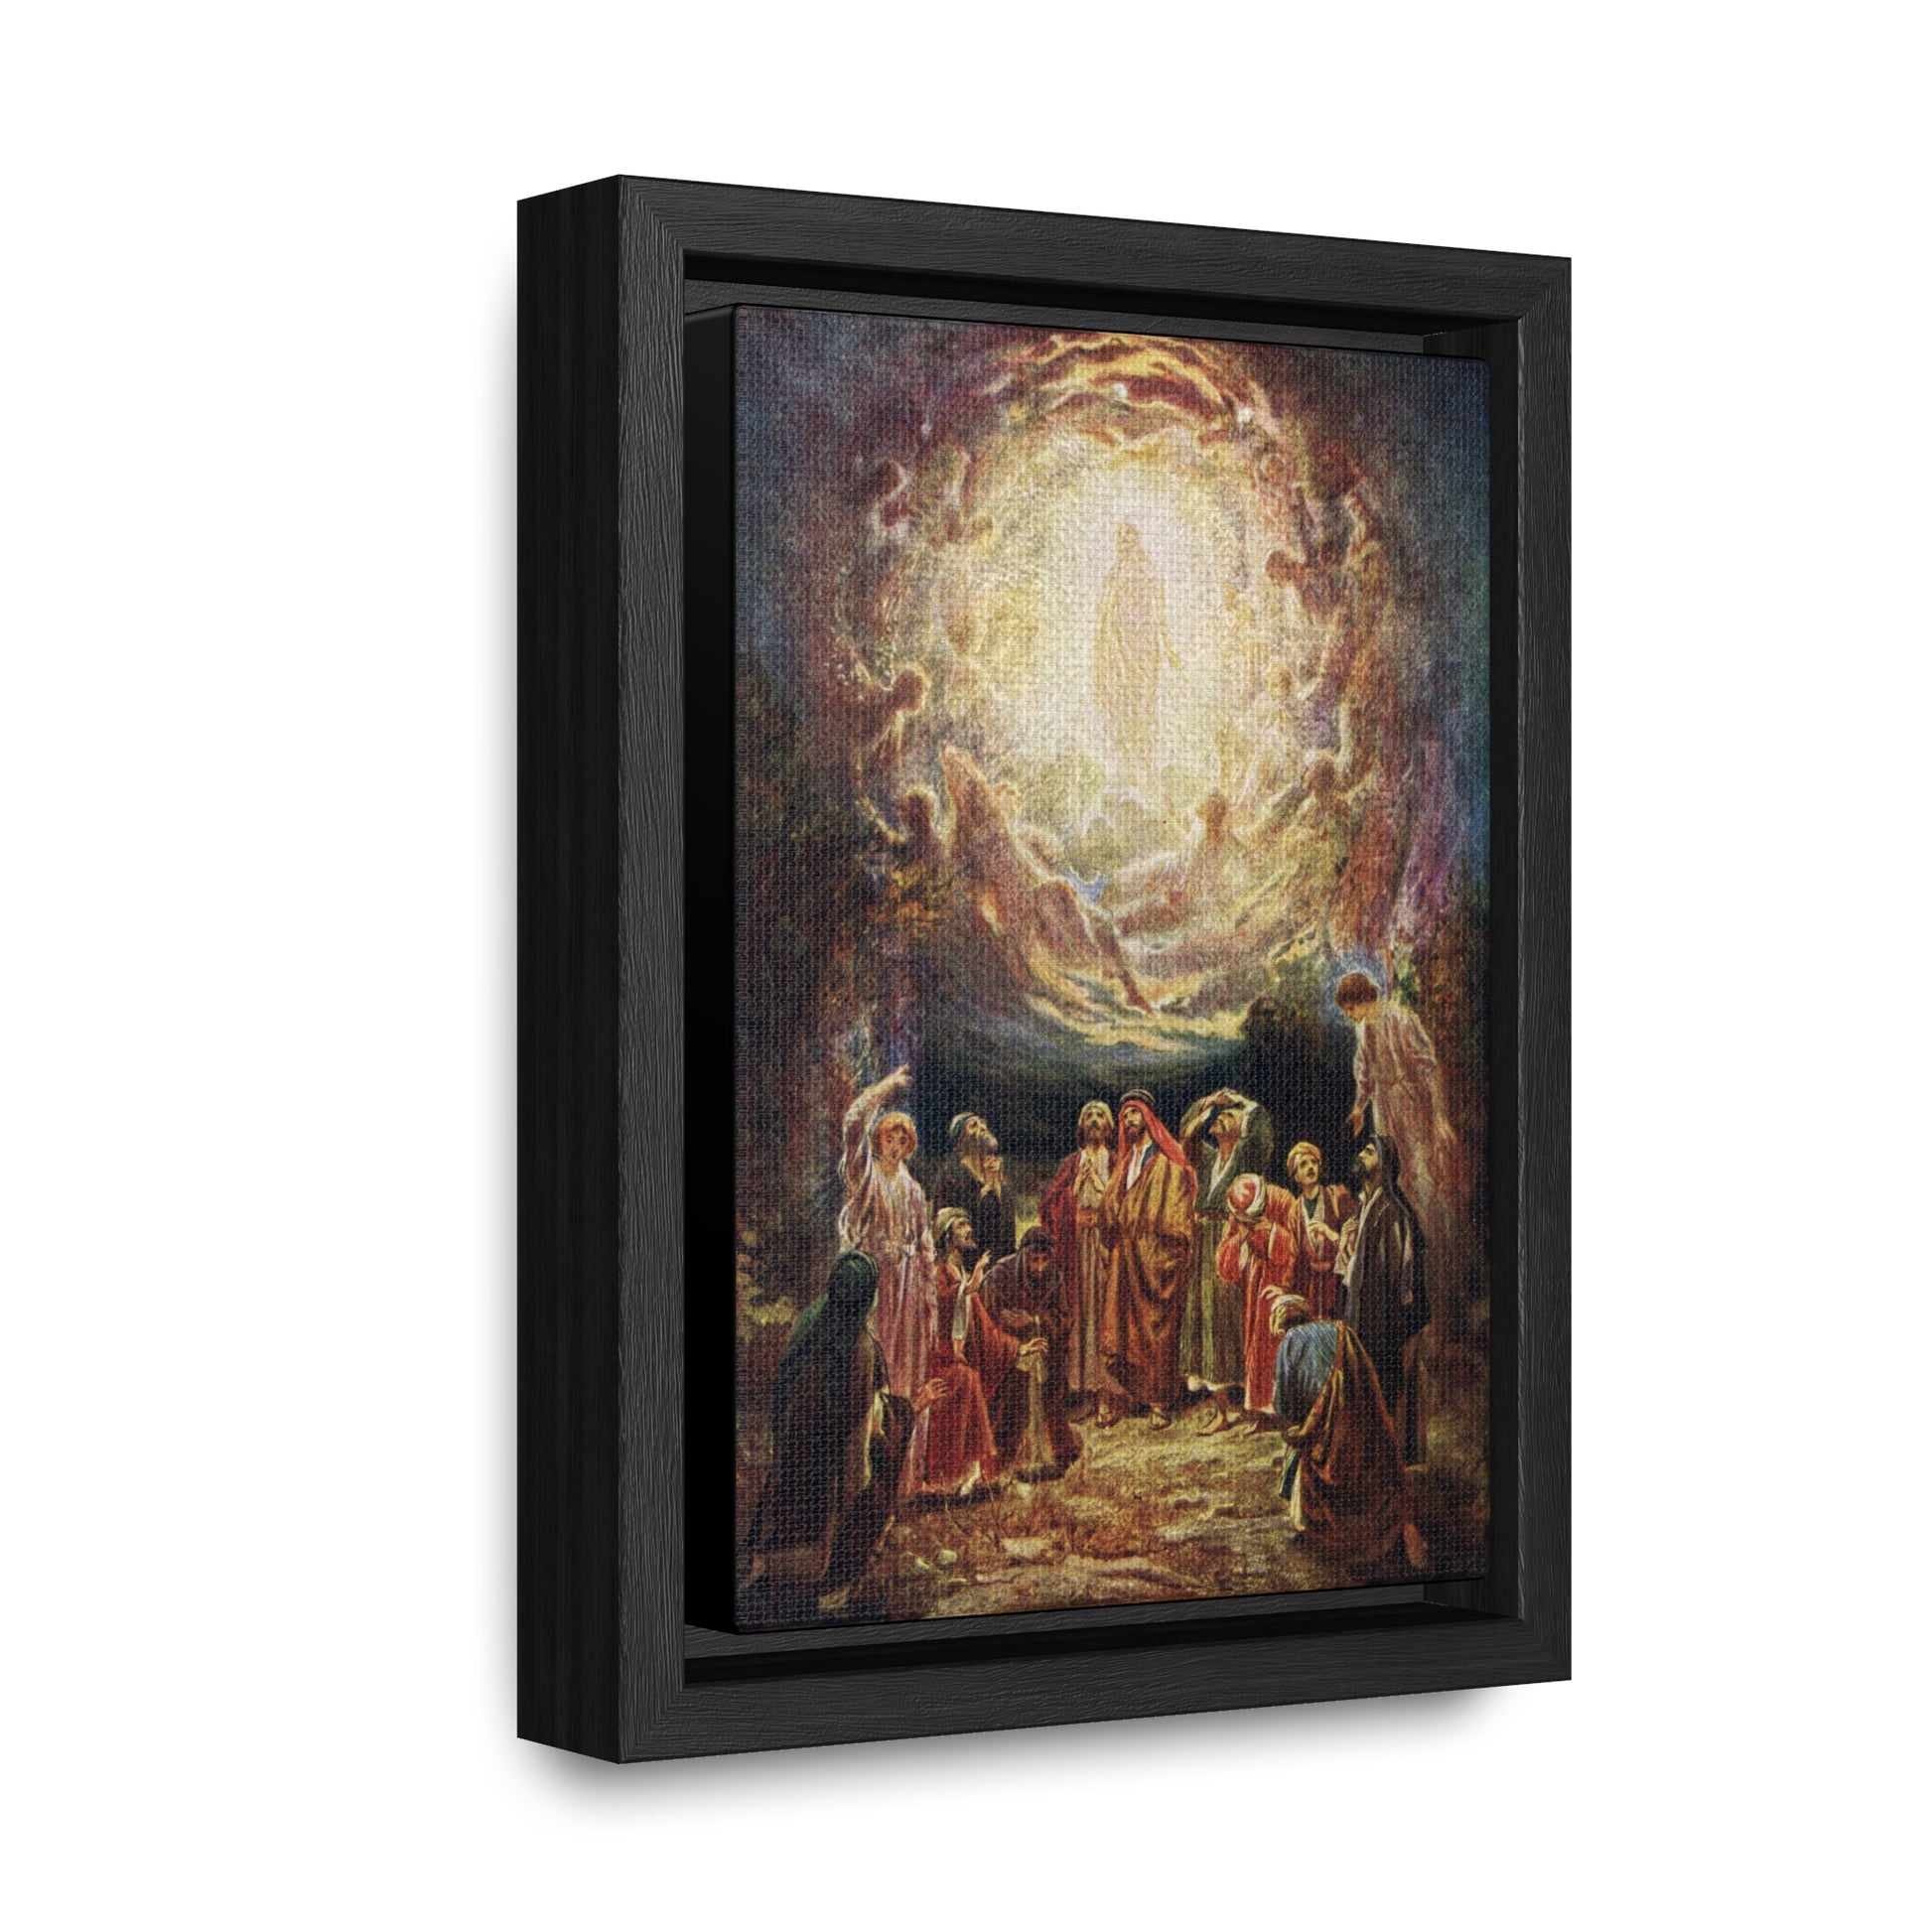 Ascension of Jesus Framed Gallery Wrapped Canvas - 5"x7" - Studio Lams Creative Collective